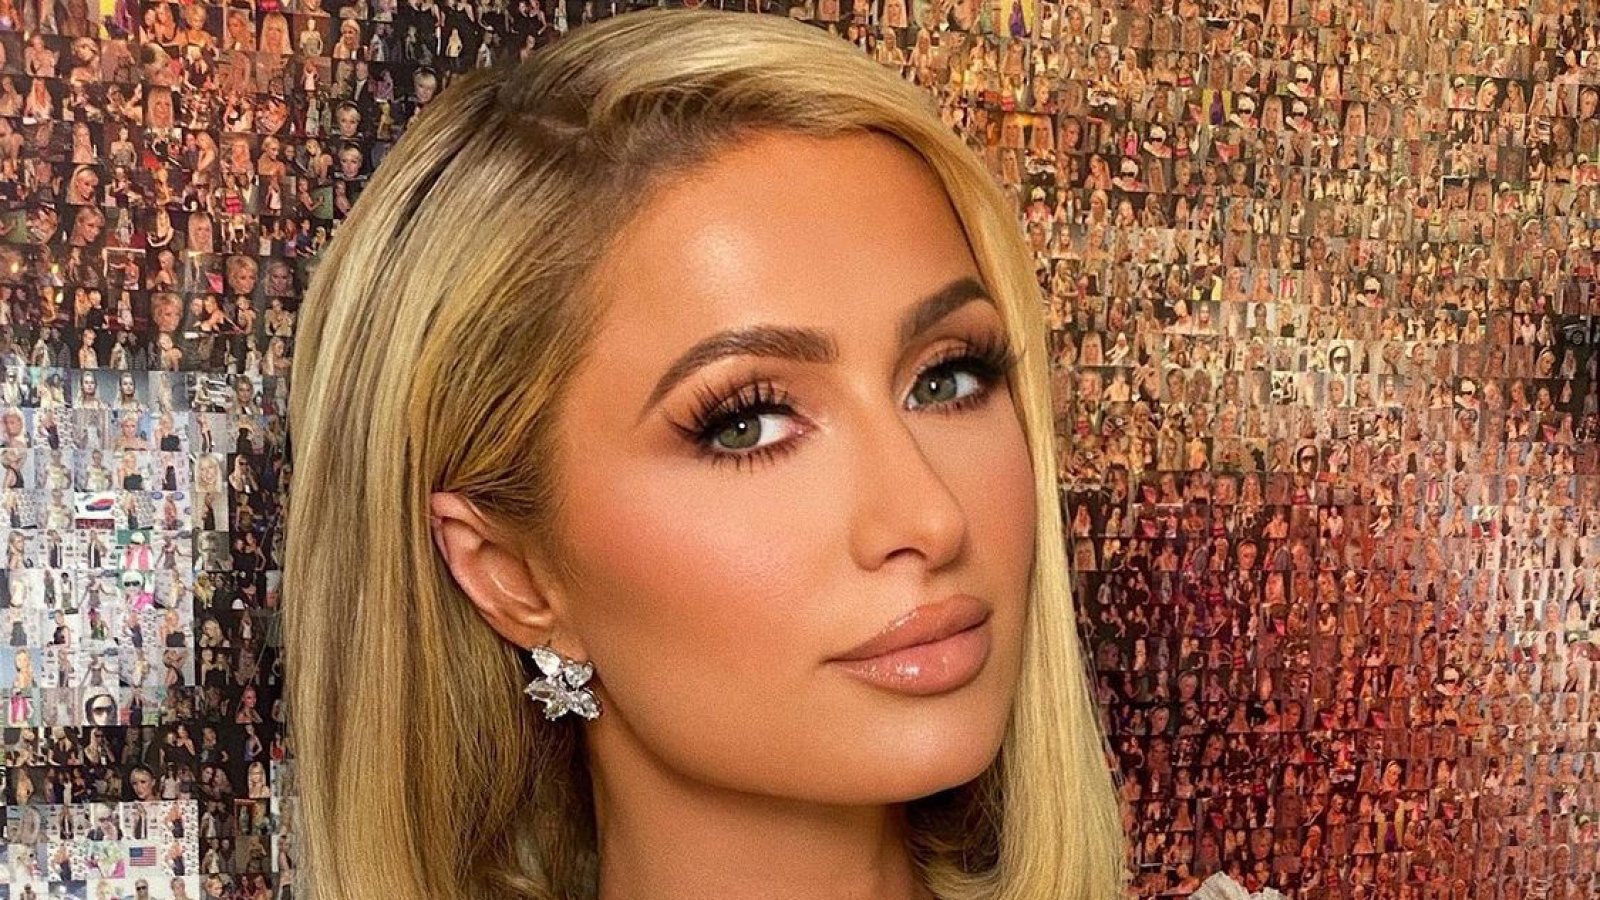 Paris Hilton Plans on Having 10 Different Dresses for Her Wedding Day: ‘I Love Outfit Changes’